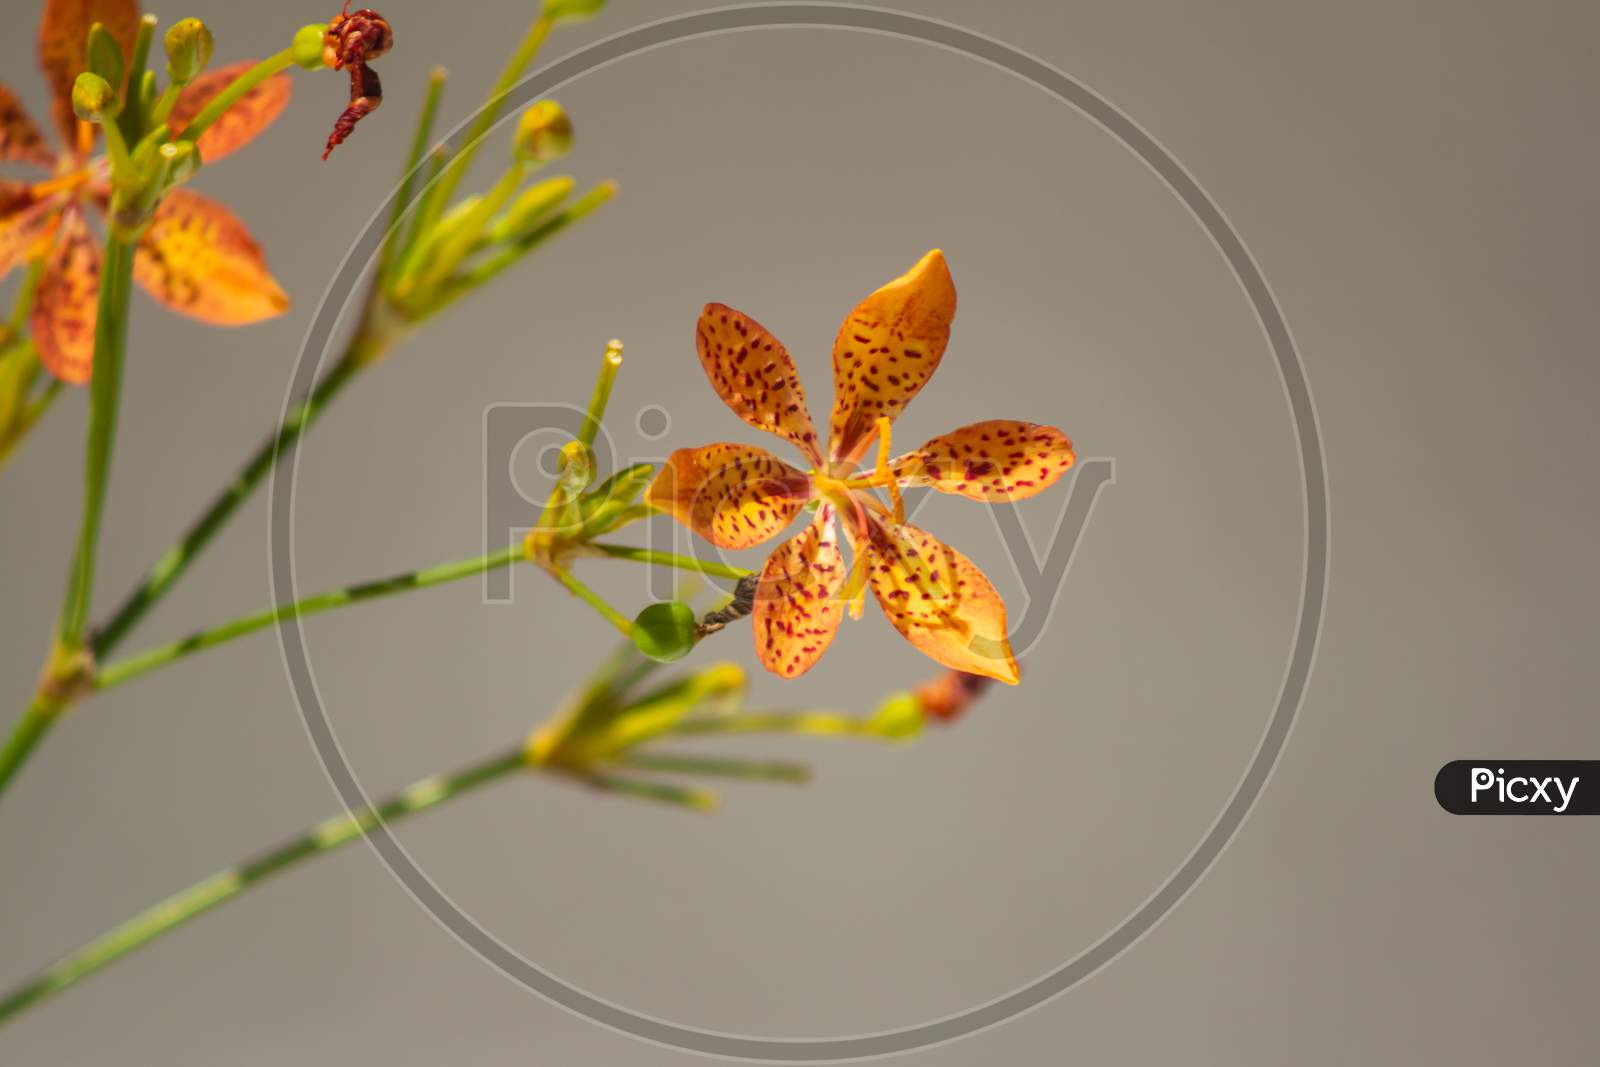 Orange Flower Of Delicate Petals With Blurred Background. Beautiful Wild Flower With Bright Reddish Colors.